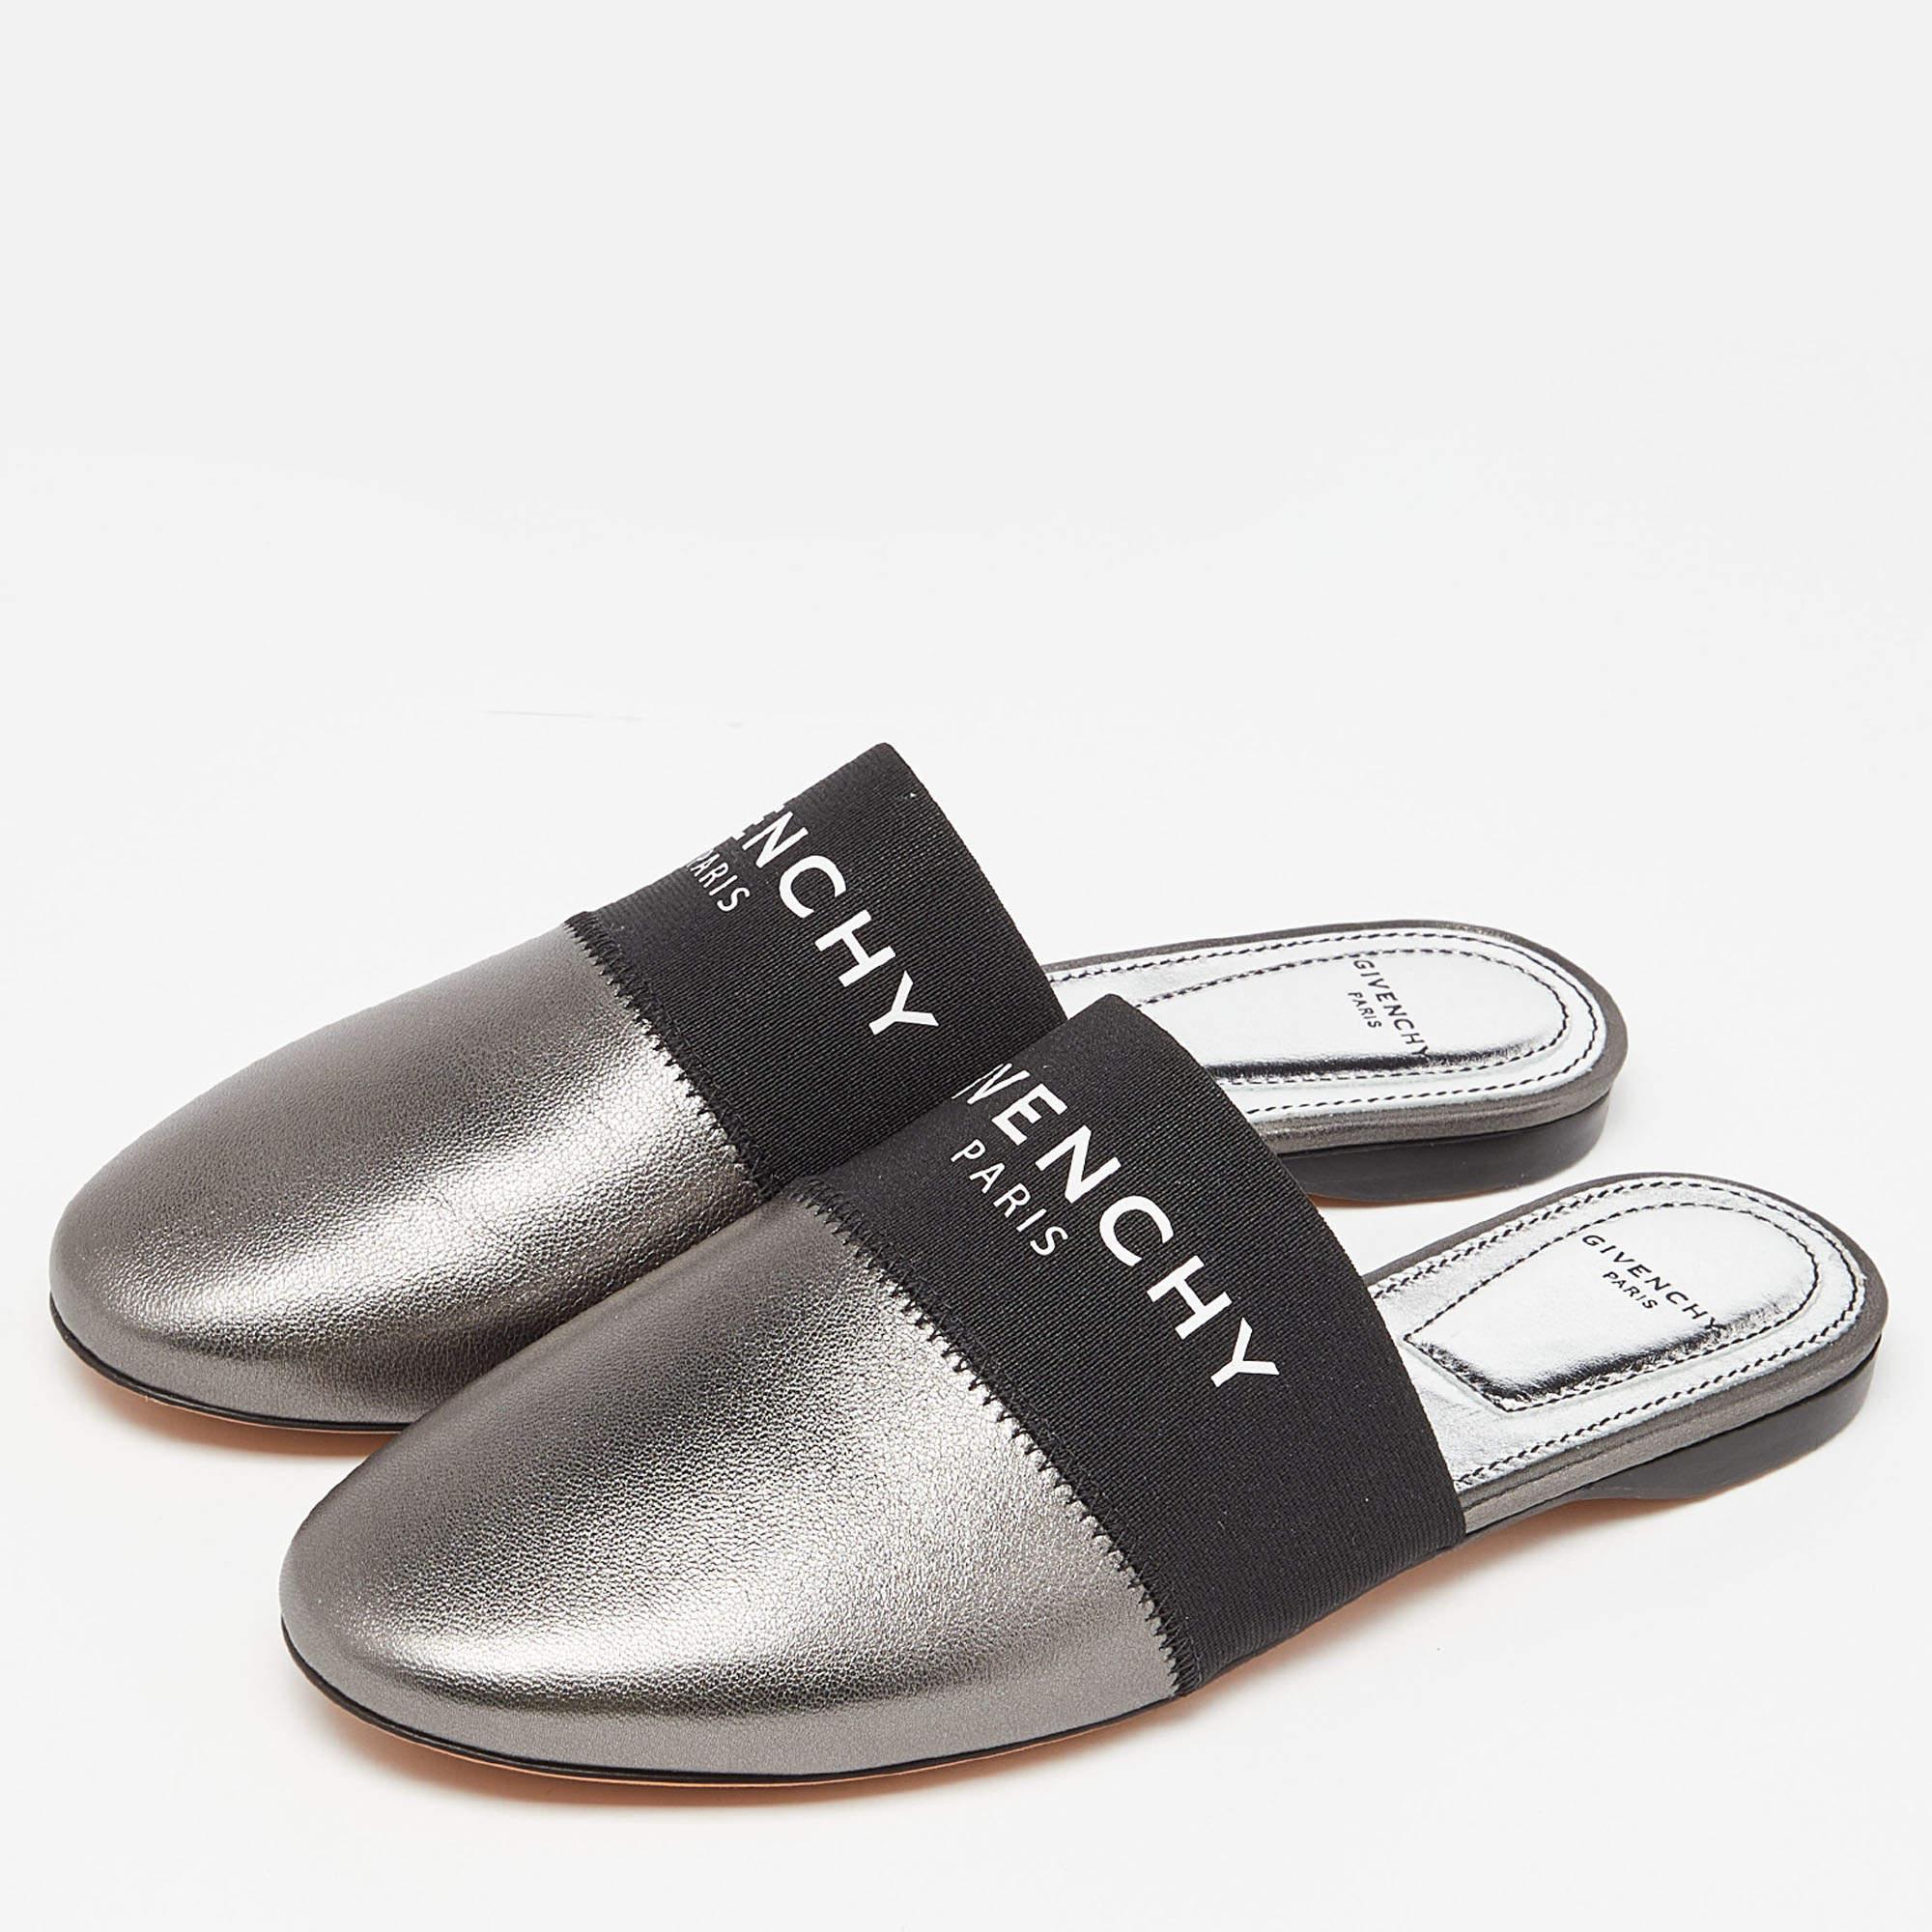 Givenchy Metallic Grey Leather Bedford Flat Mules Size 36 For Sale 2